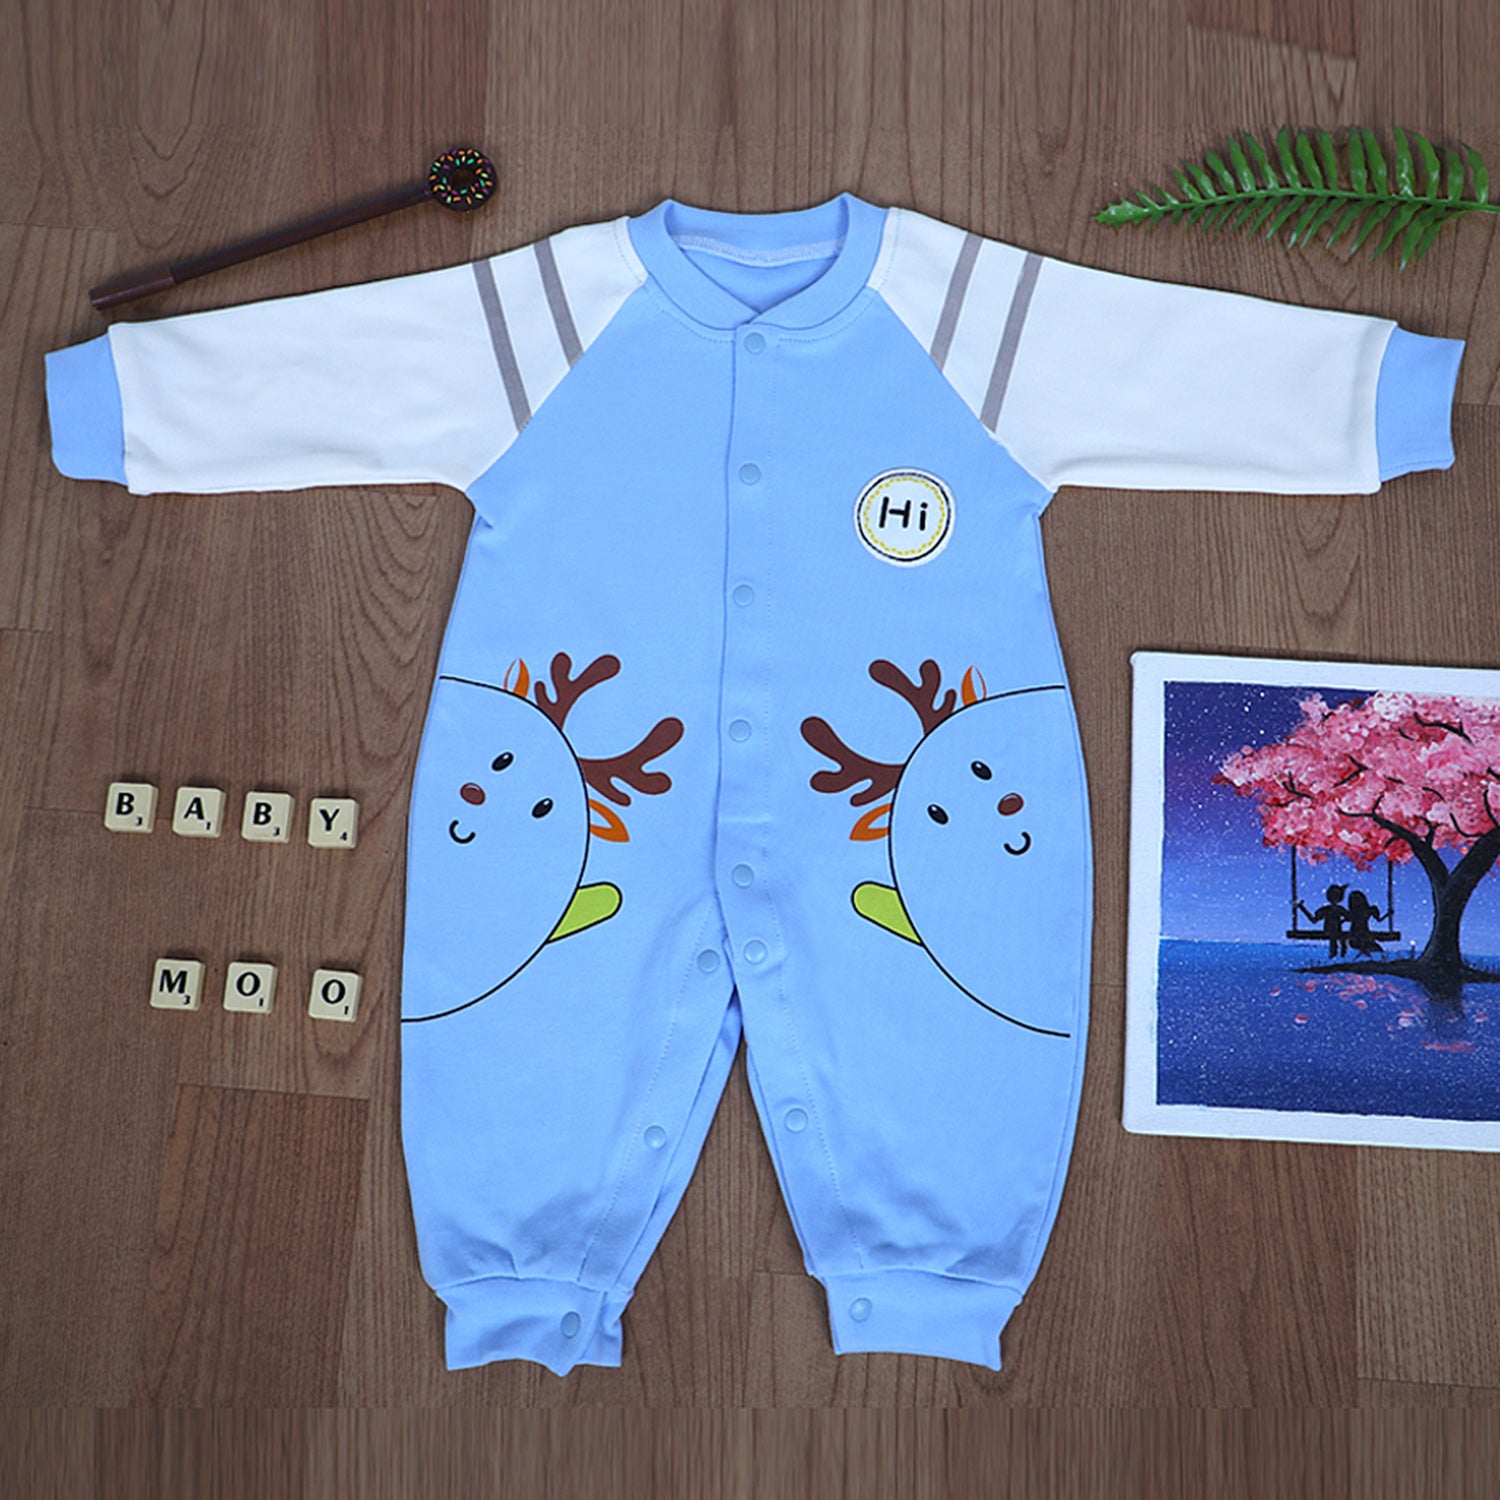 Hi Reindeer Full Sleeves Ankle Length One-Piece Snap Button Bodysuit - Blue